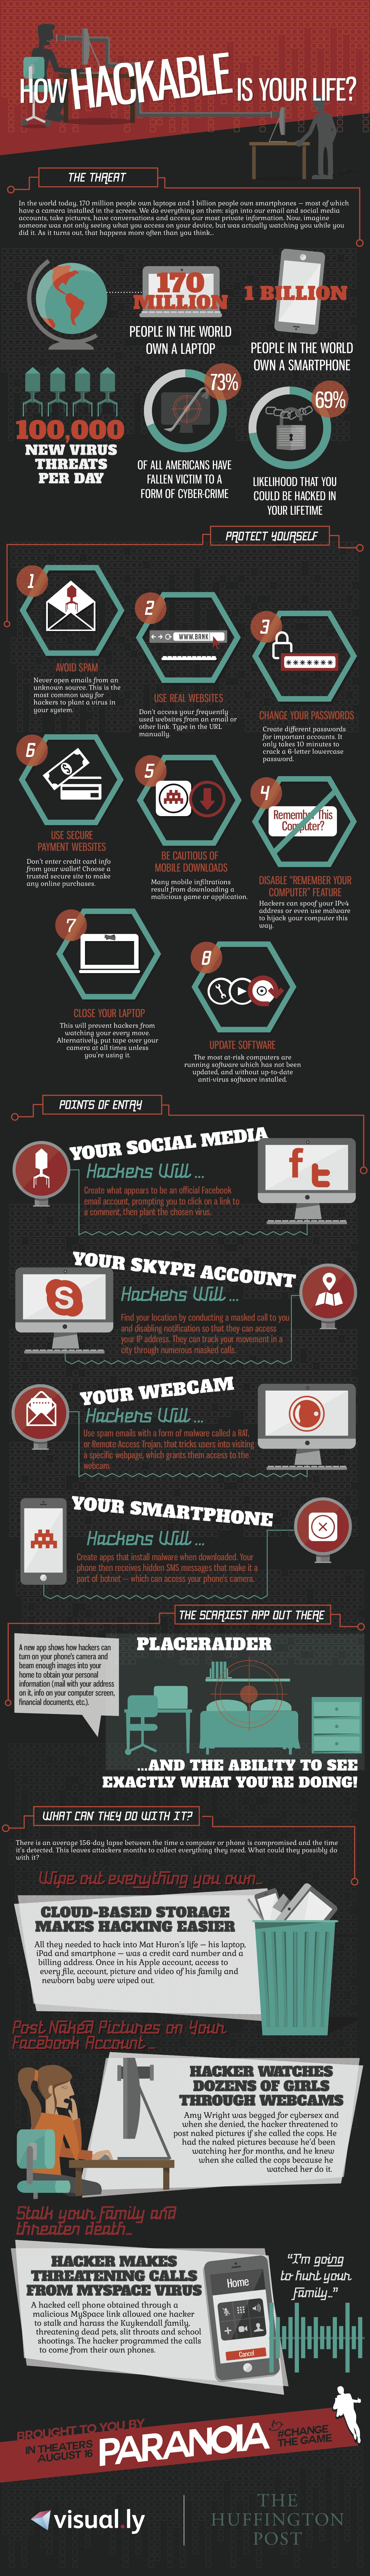 How Hackable Is Your Life & Everyday Tech? [Infographic]